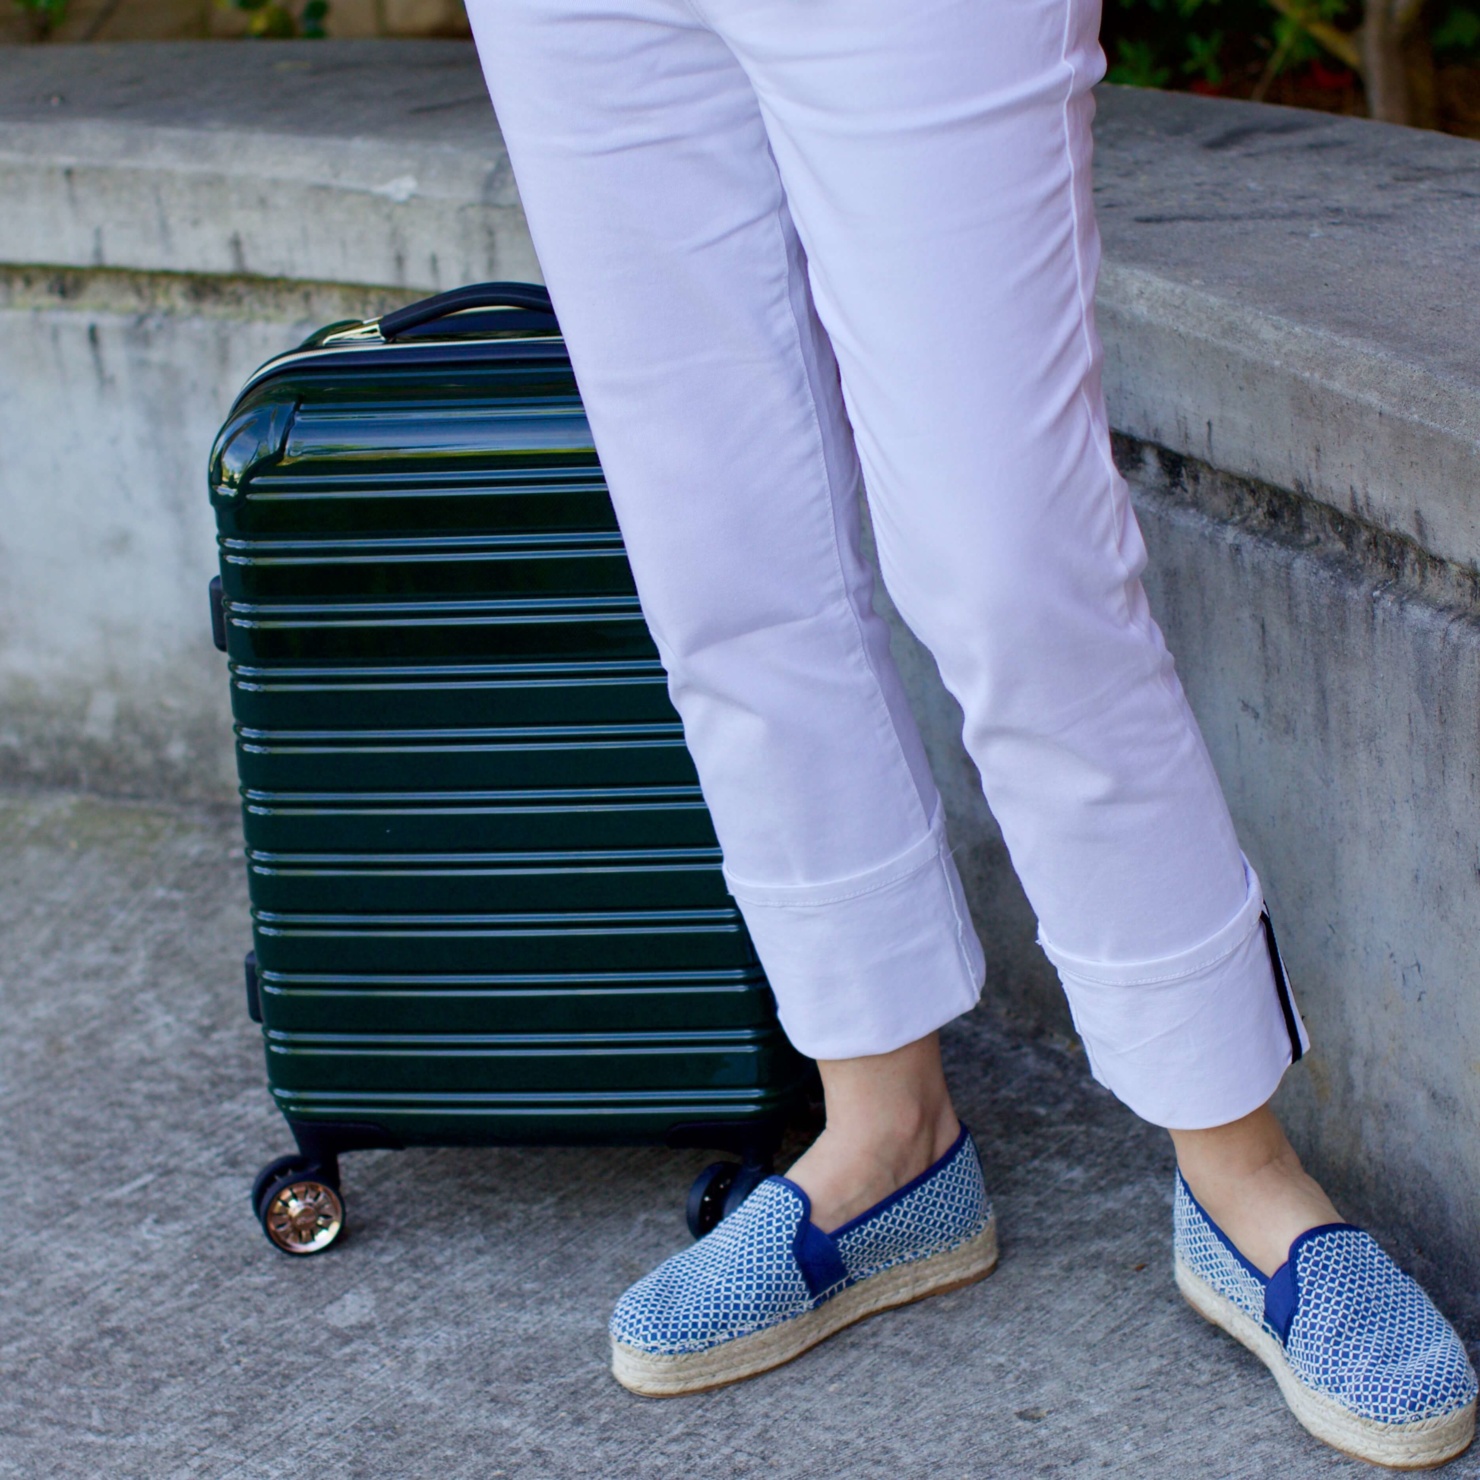 beth from Style at a Certain Age wears white denim, blue and white striped tee, platform espadrilles